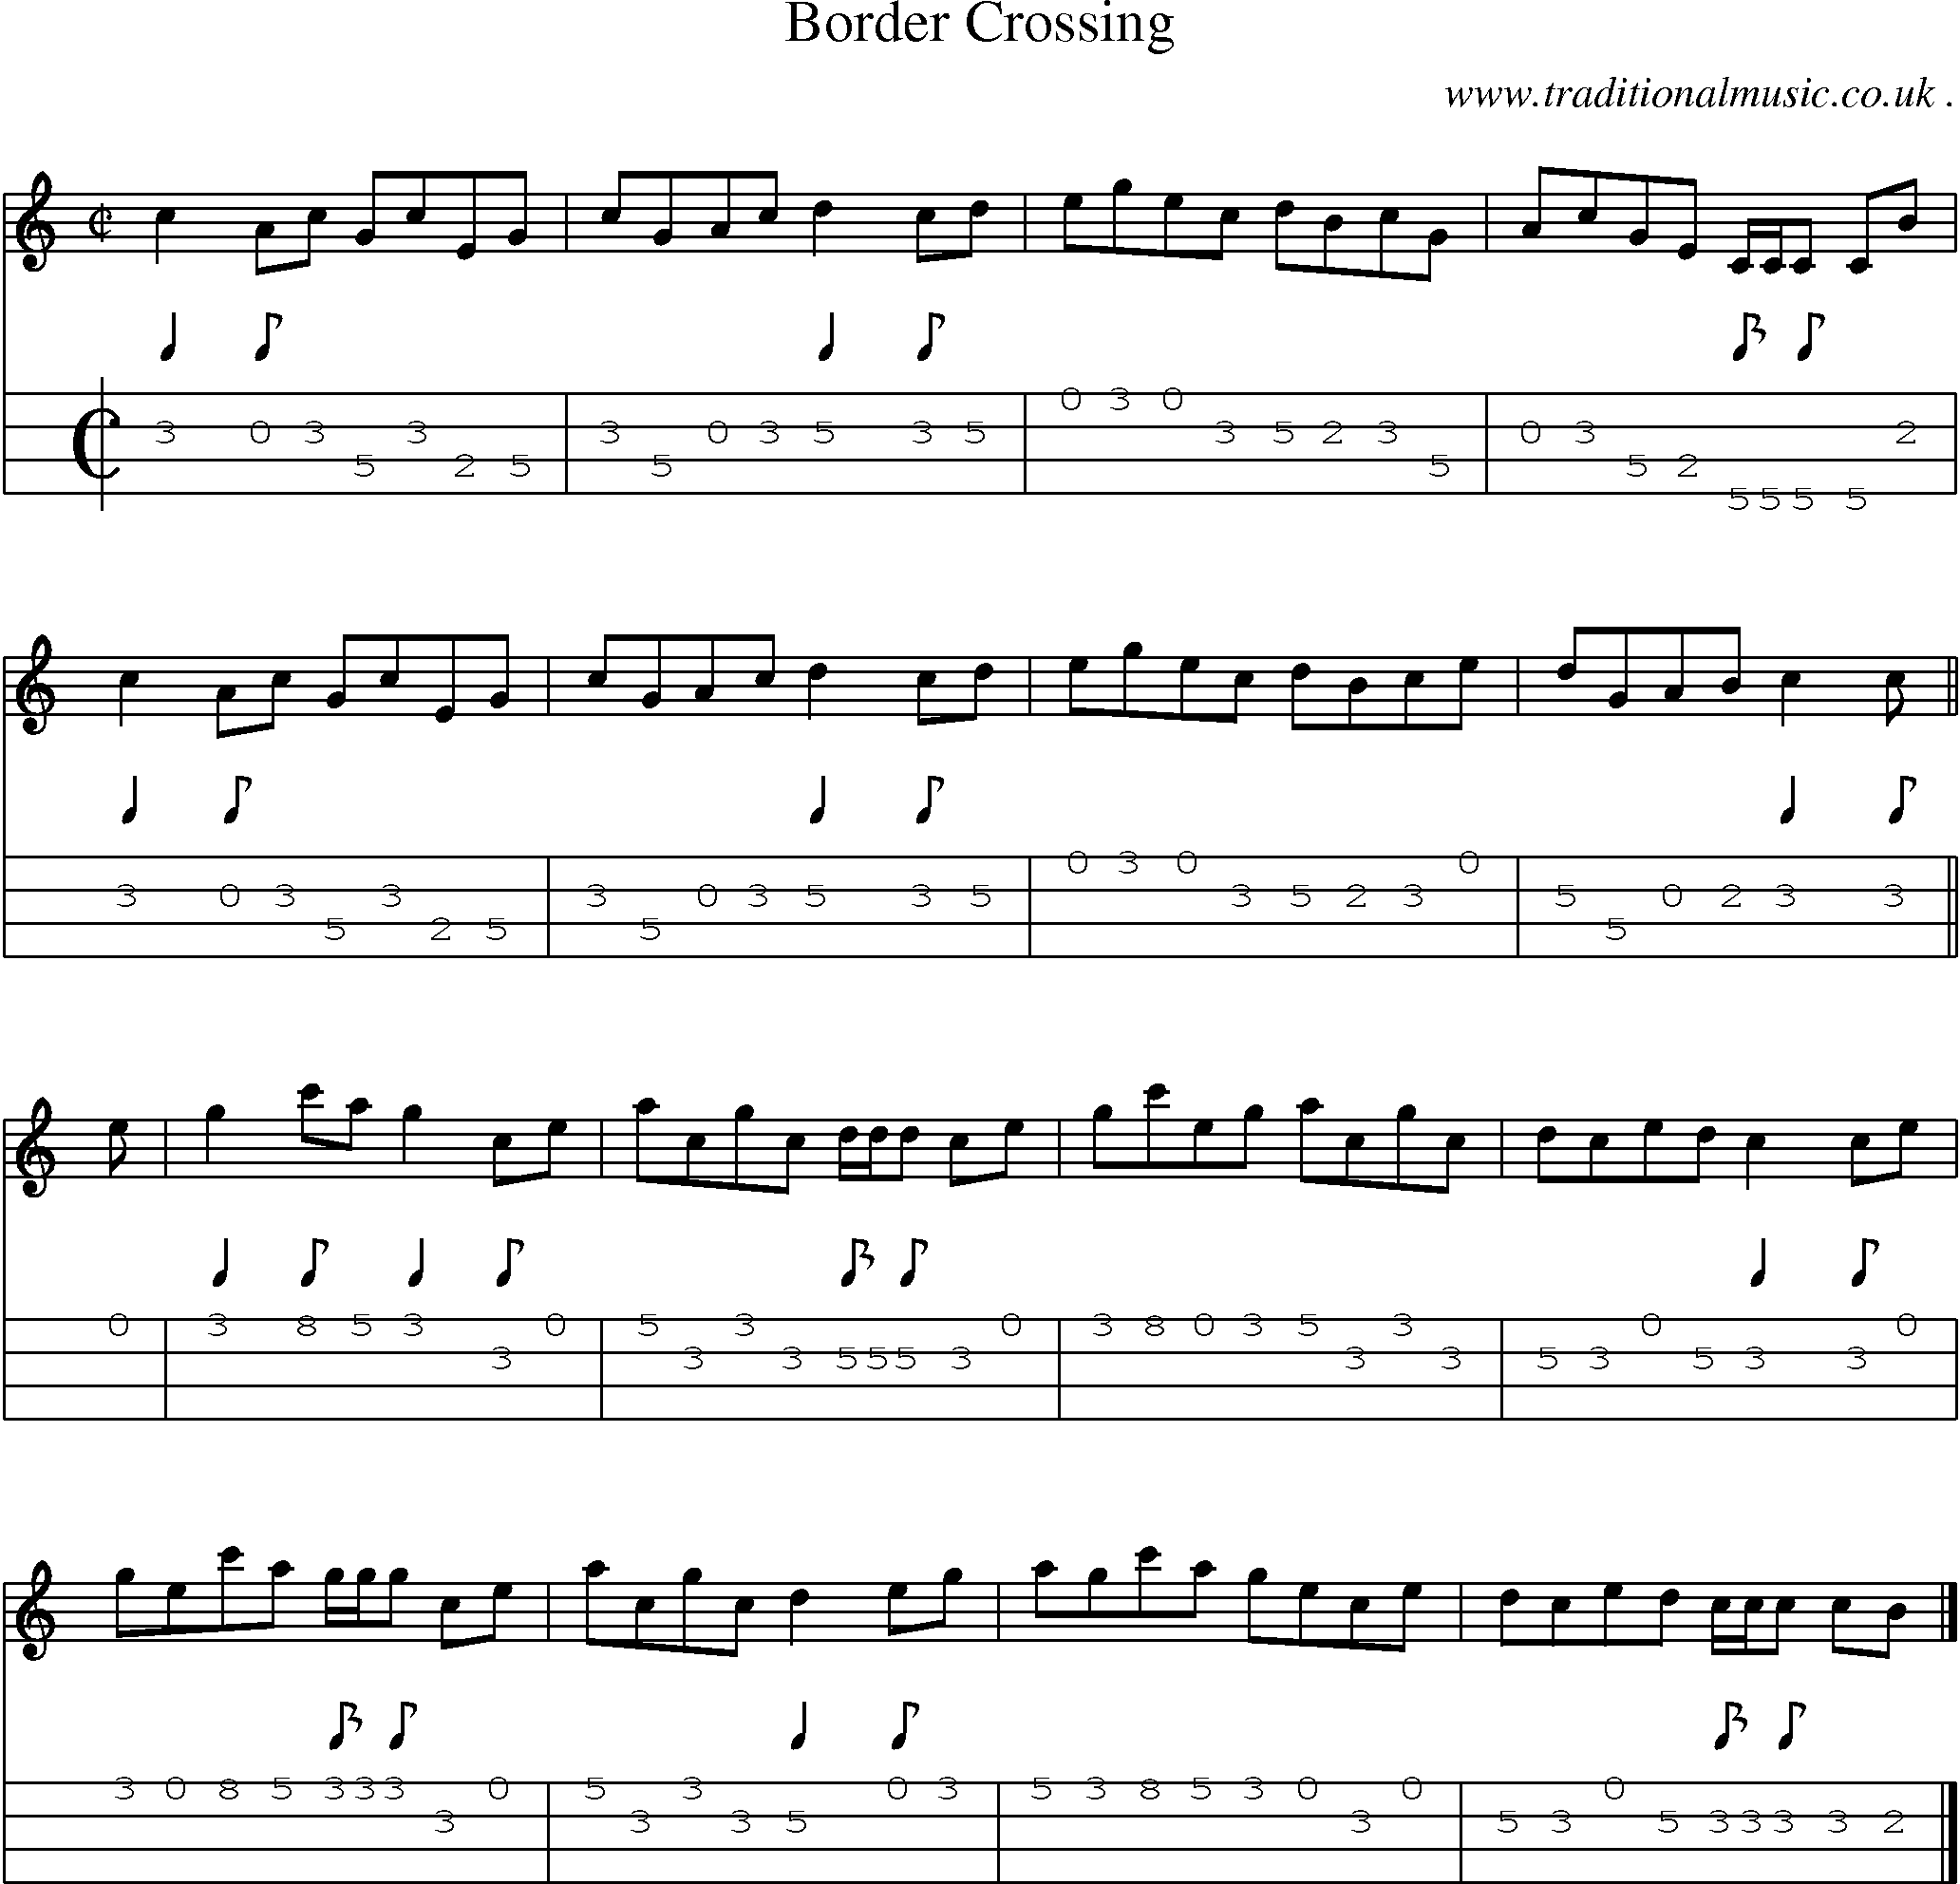 Sheet-music  score, Chords and Mandolin Tabs for Border Crossing